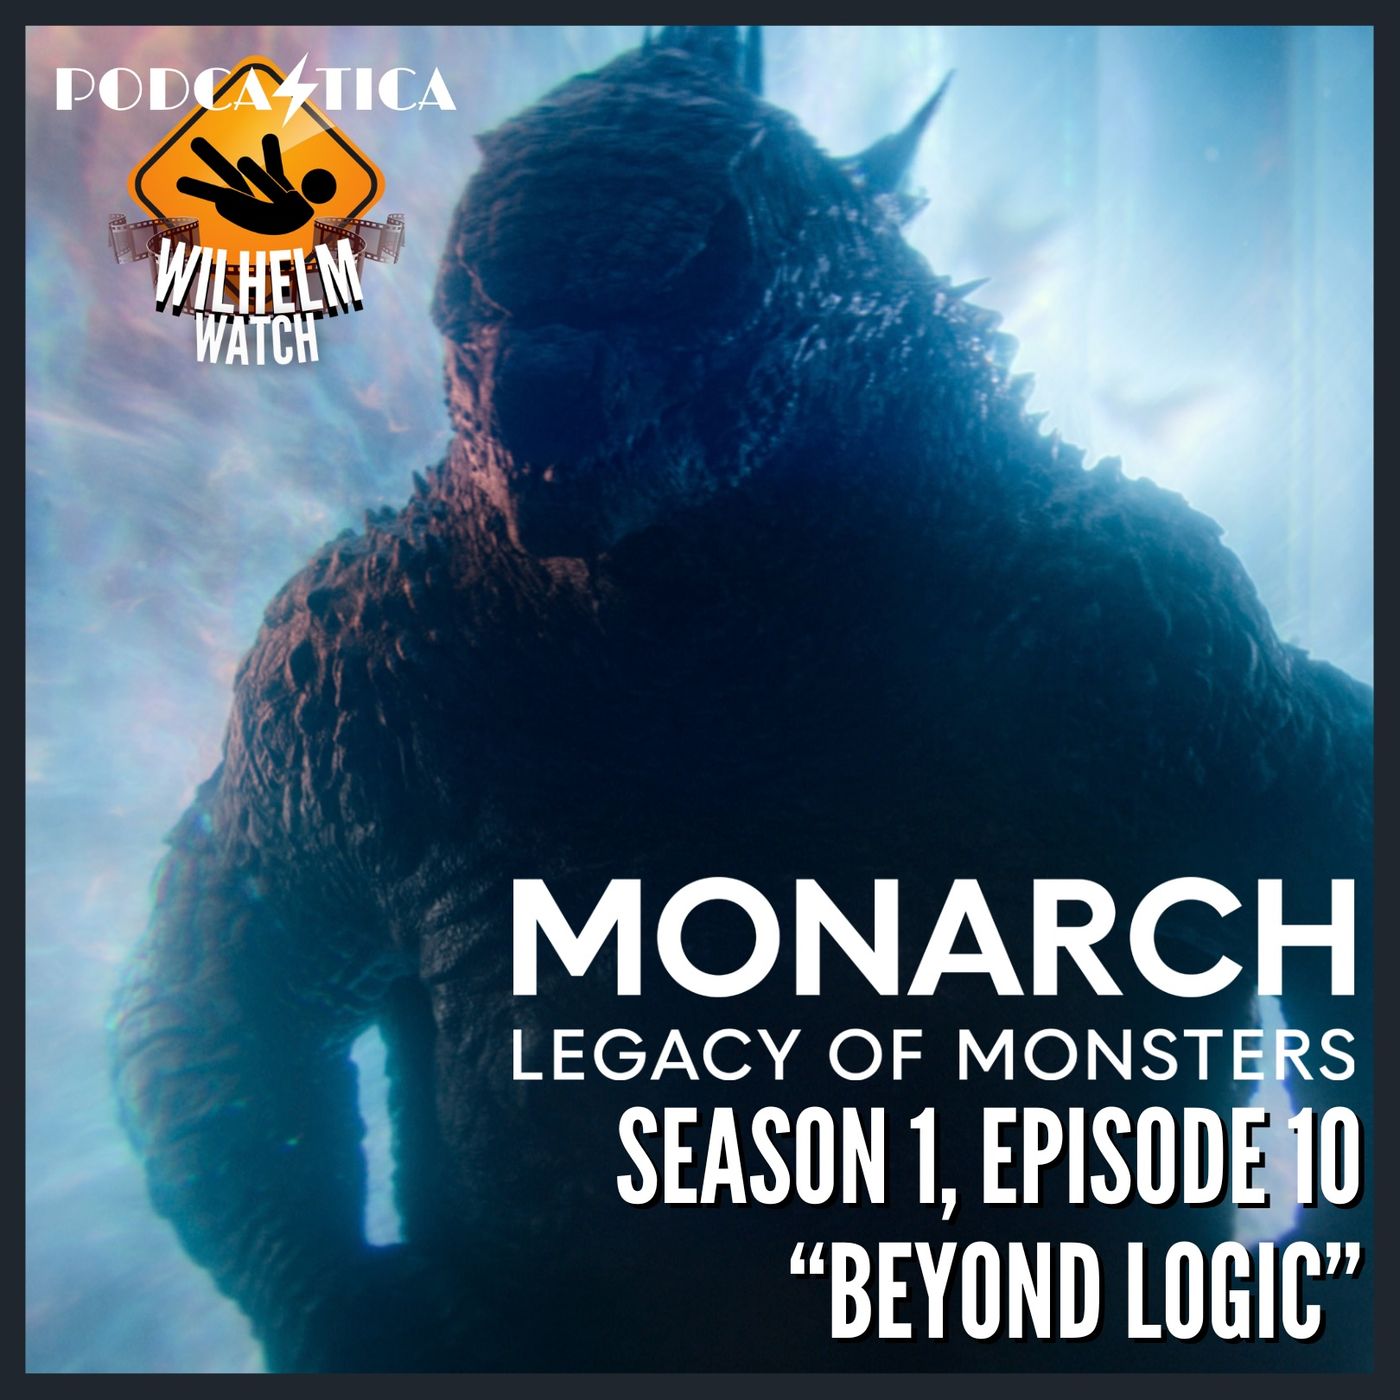 ”Beyond Logic” (Monarch: Legacy of Monsters S1E10)